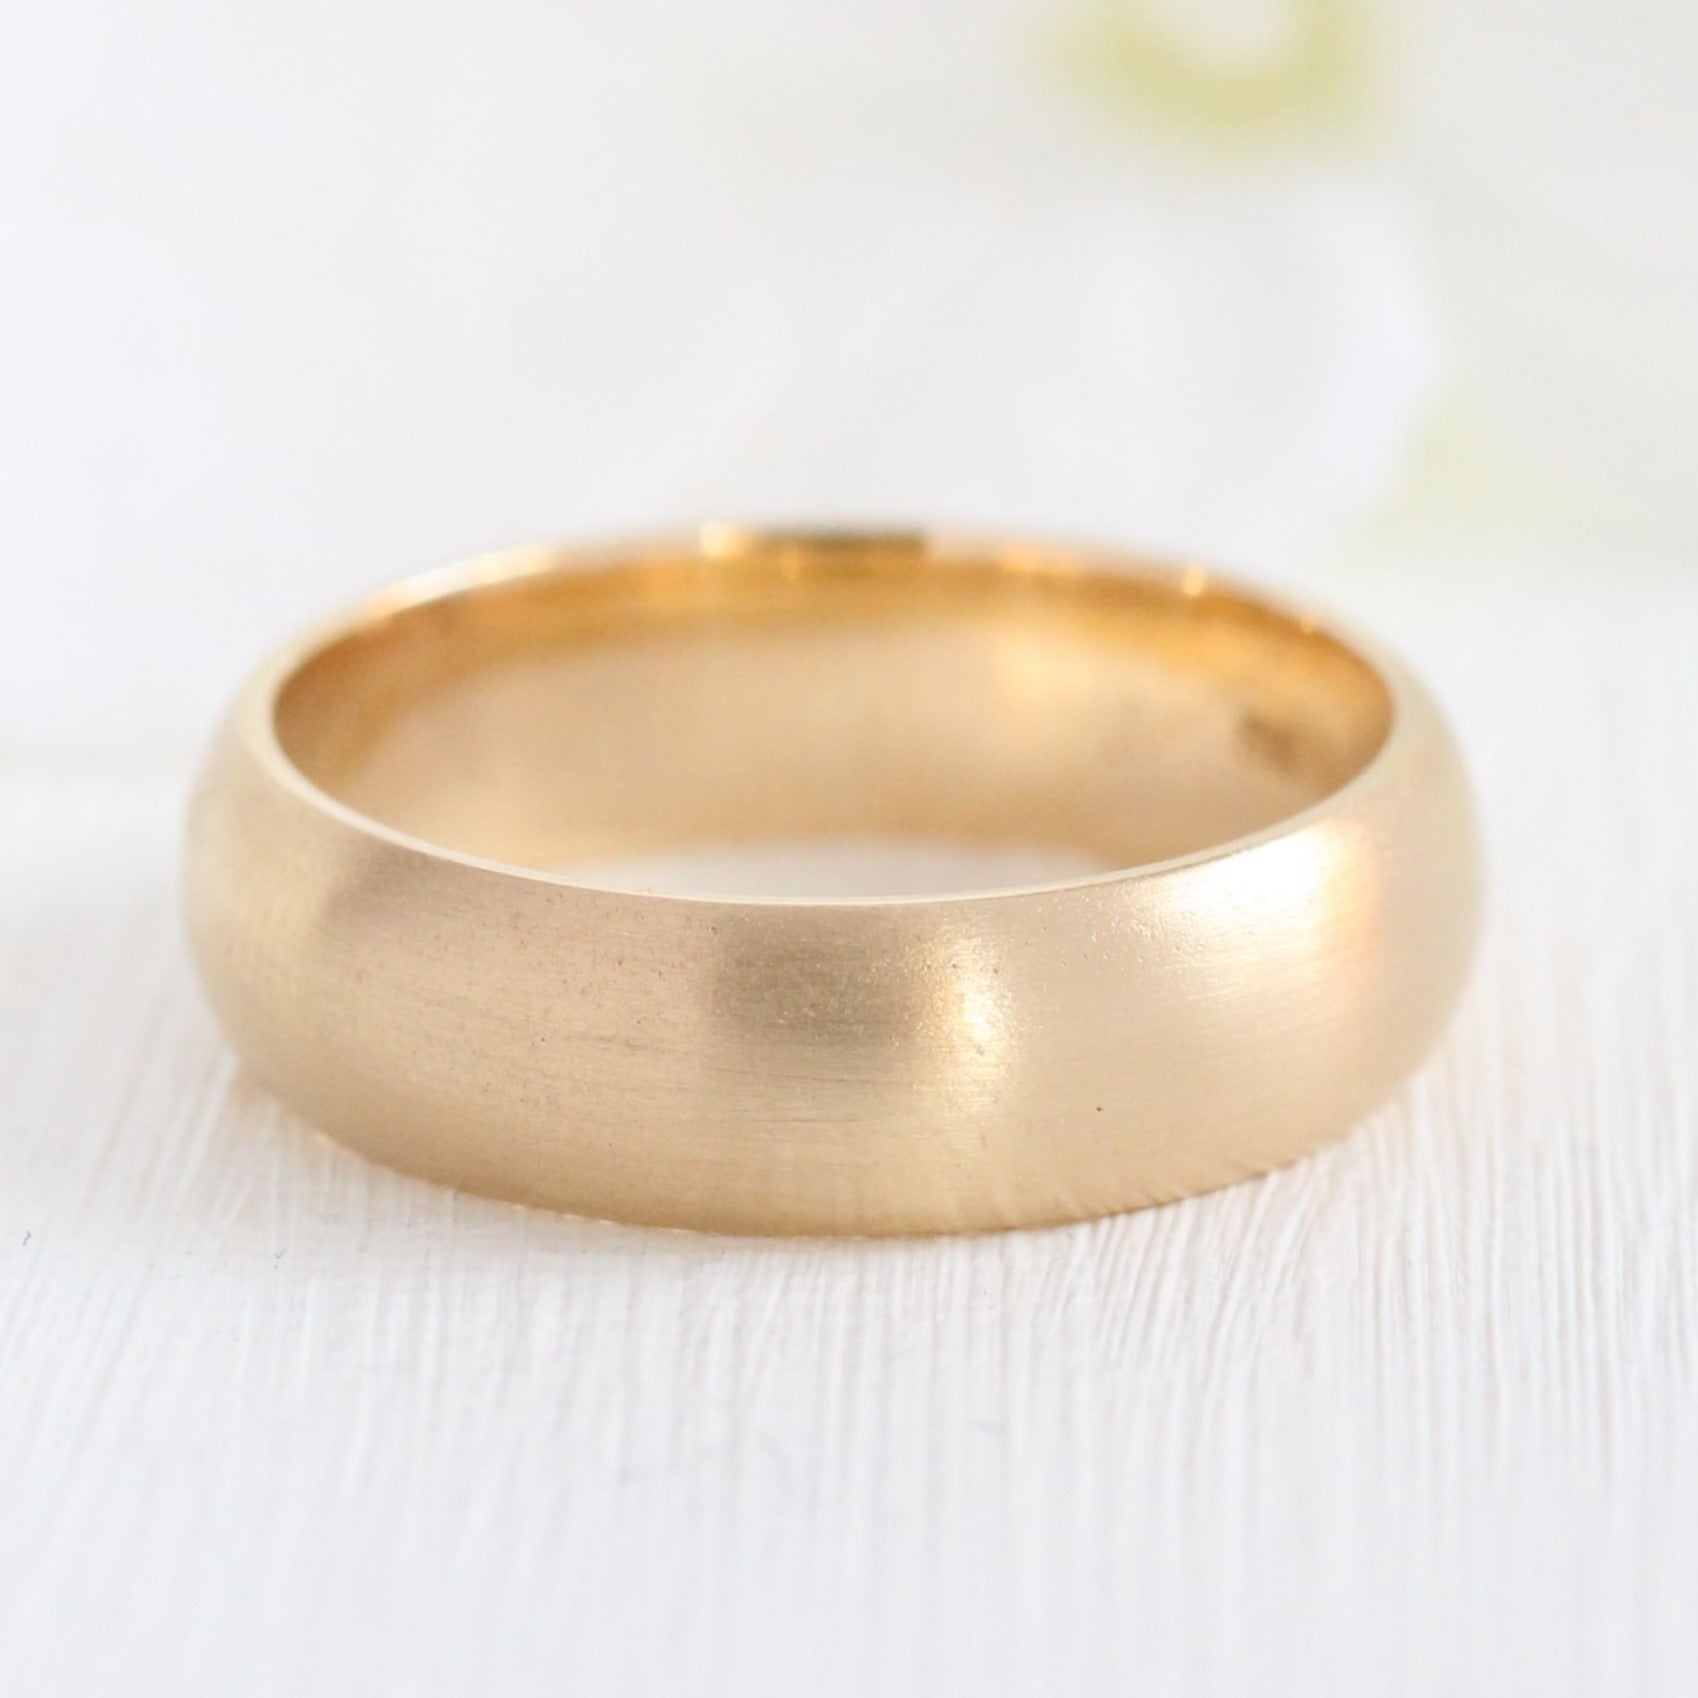 ROUND & ROUND Wedding Ring Sale Size 10 Womens Ring Gold Size 10 Men's Rings  Gold Ring Size 10 Full Round Wedding Band 14k Gold 